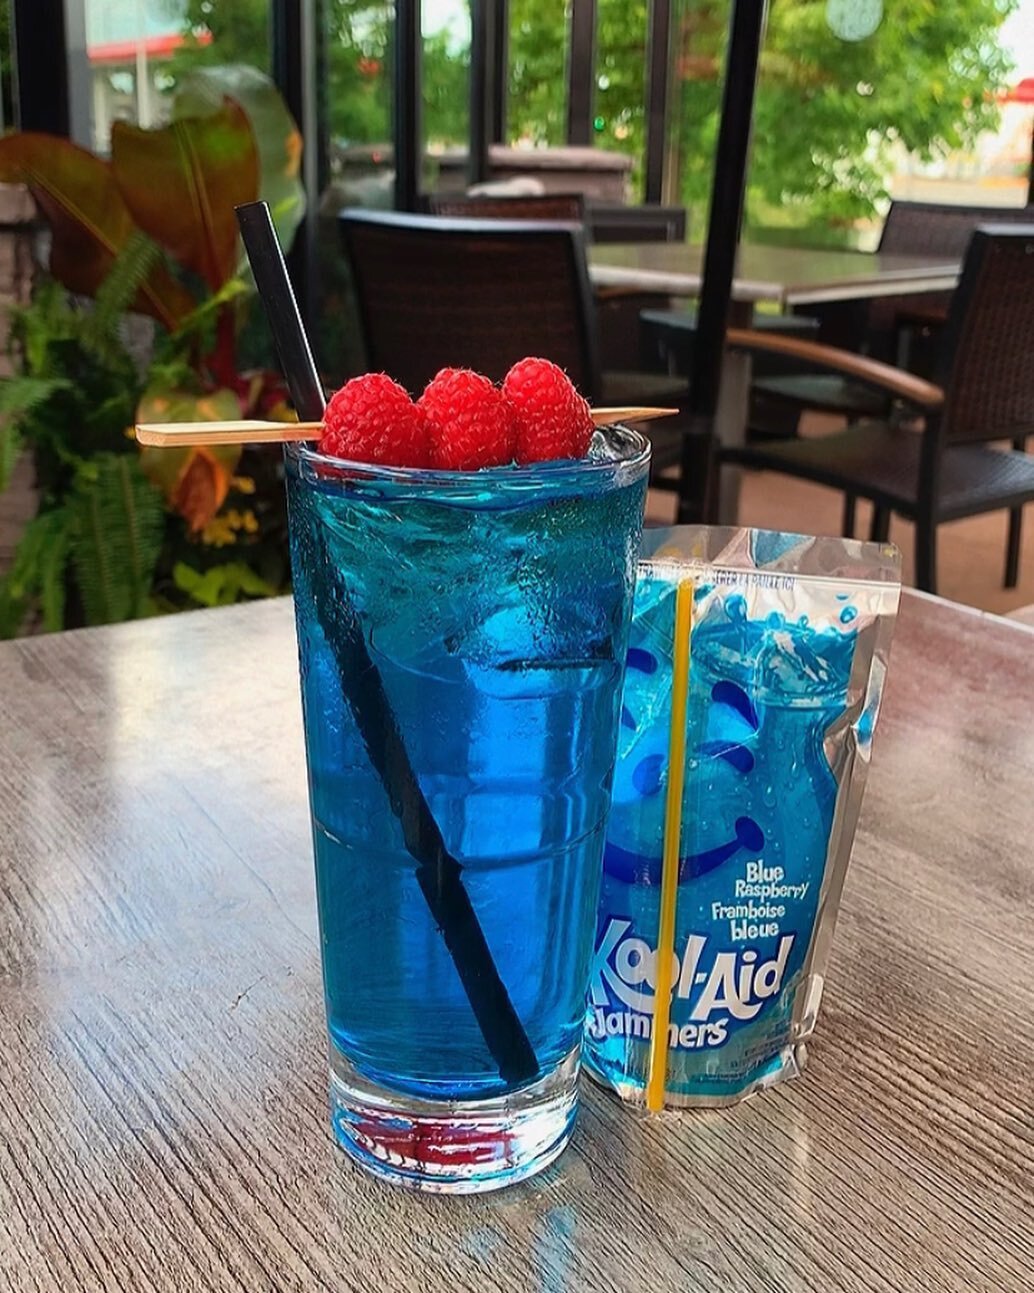 Introducing the Blue Raspberry Tequila Jammers! 💙❤️

For one night only! Come try out a special cocktail menu on August 22nd for 2000&rsquo;s Trivia night! 

Call to reserve your spot 905-315-1588. 

#koolaidjammers #y2knostalgia #y2k #millenials #b